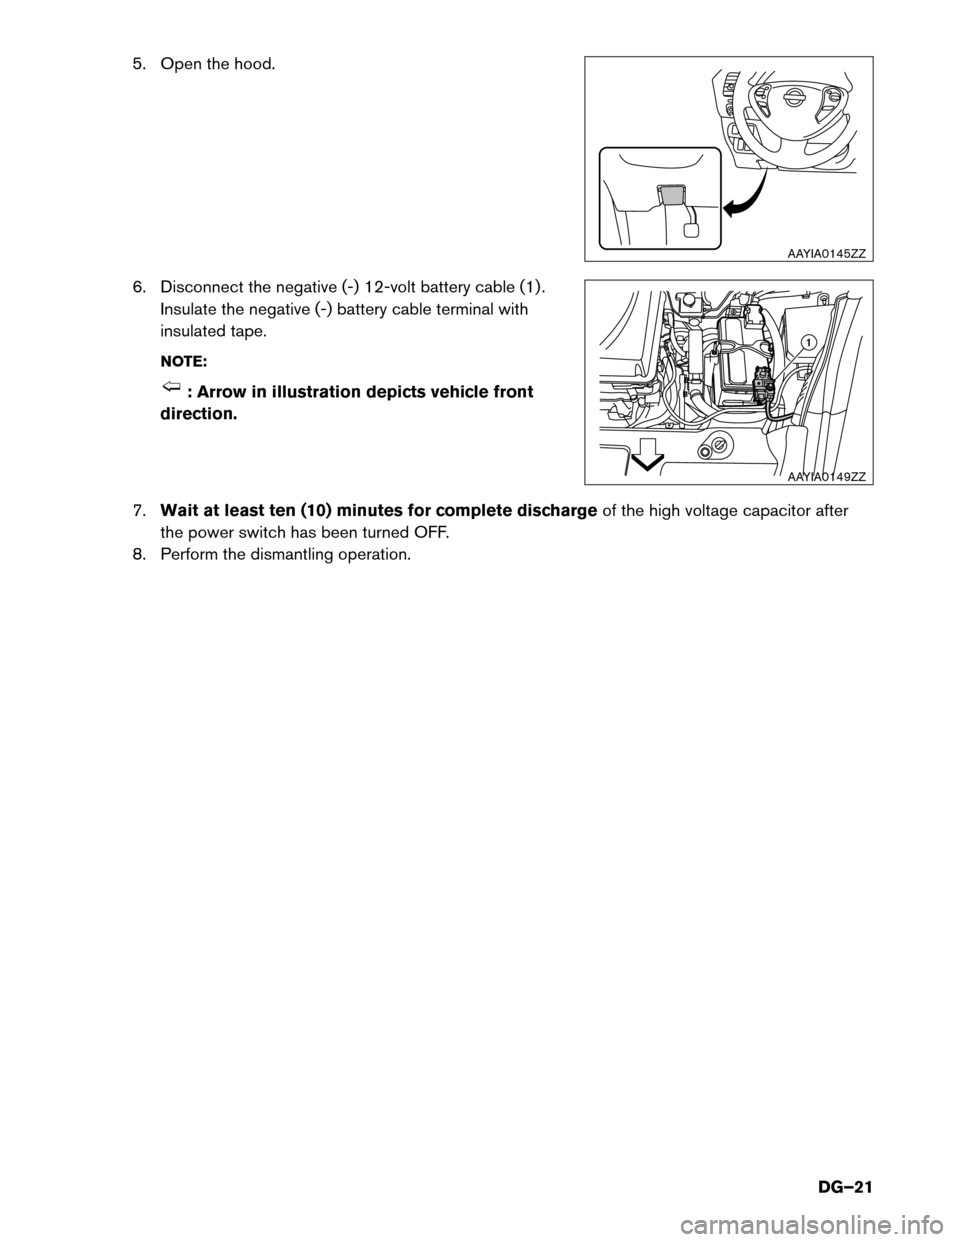 NISSAN LEAF 2016 1.G Dismantling Guide 5. Open the hood.
6.
Disconnect the negative (-) 12-volt battery cable (1) .
Insulate the negative (-) battery cable terminal with
insulated tape.
NOTE: : Arrow in illustration depicts vehicle front
d